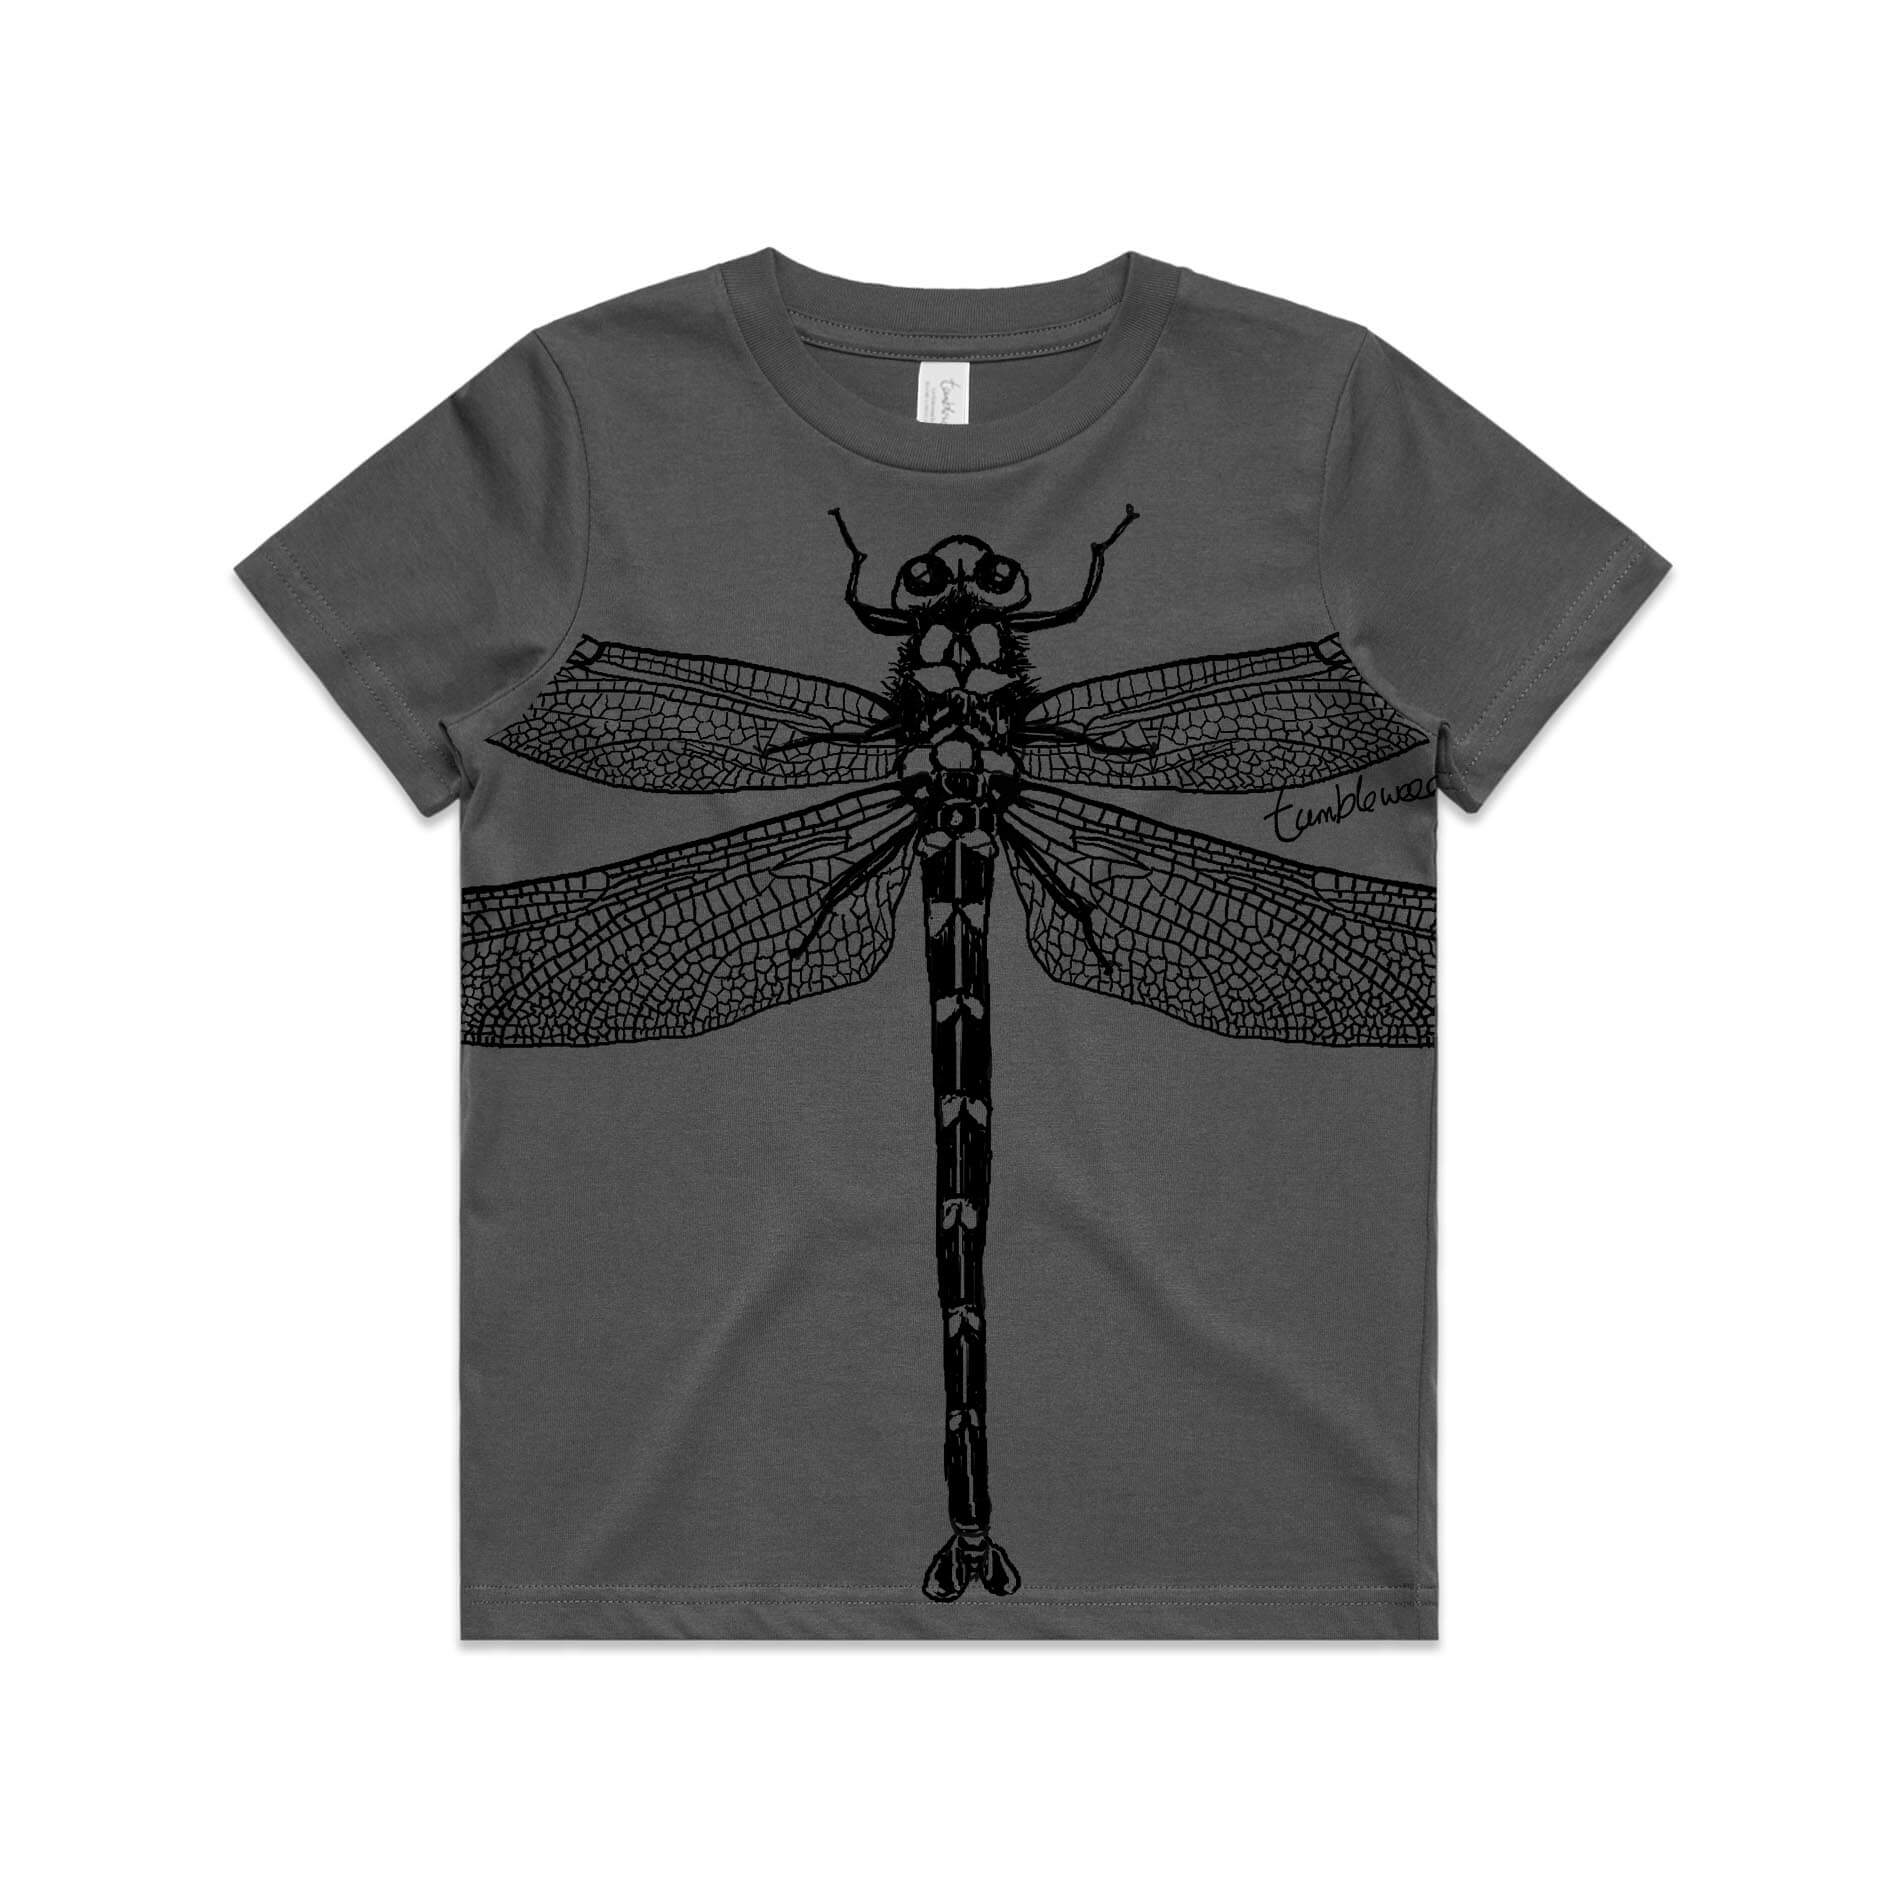 Charcoal, cotton kids' t-shirt with screen printed Kids dragonfly design.